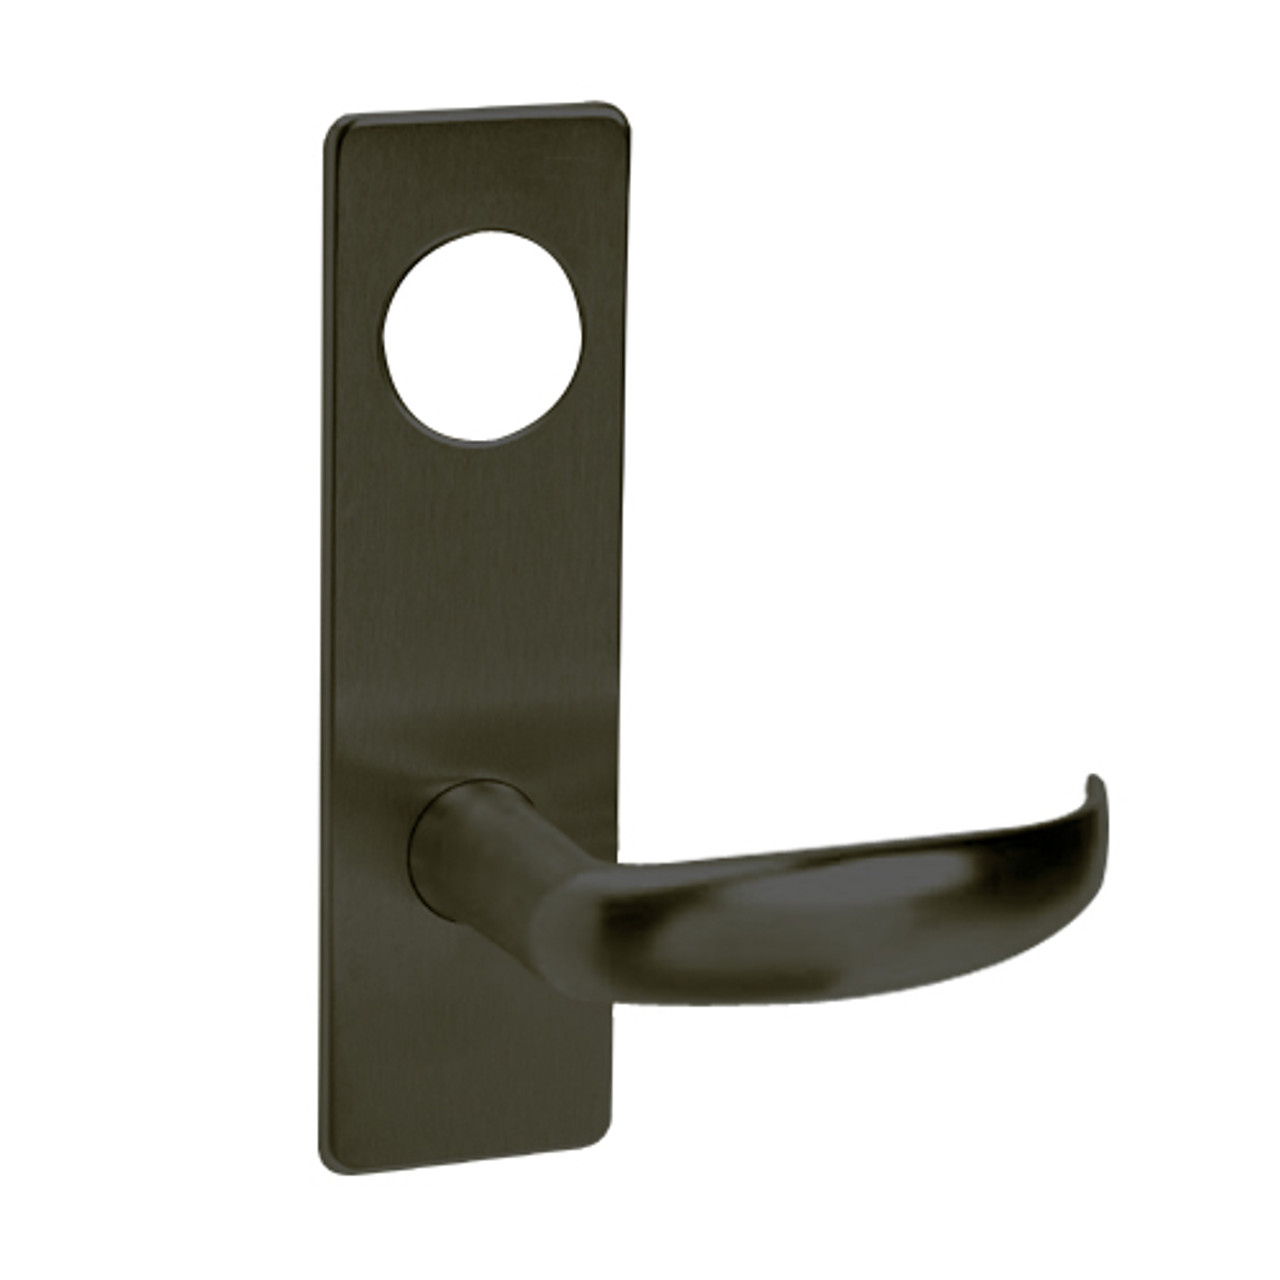 ML2048-PSM-613-CL6 Corbin Russwin ML2000 Series IC 6-Pin Less Core Mortise Entrance Locksets with Princeton Lever in Oil Rubbed Bronze